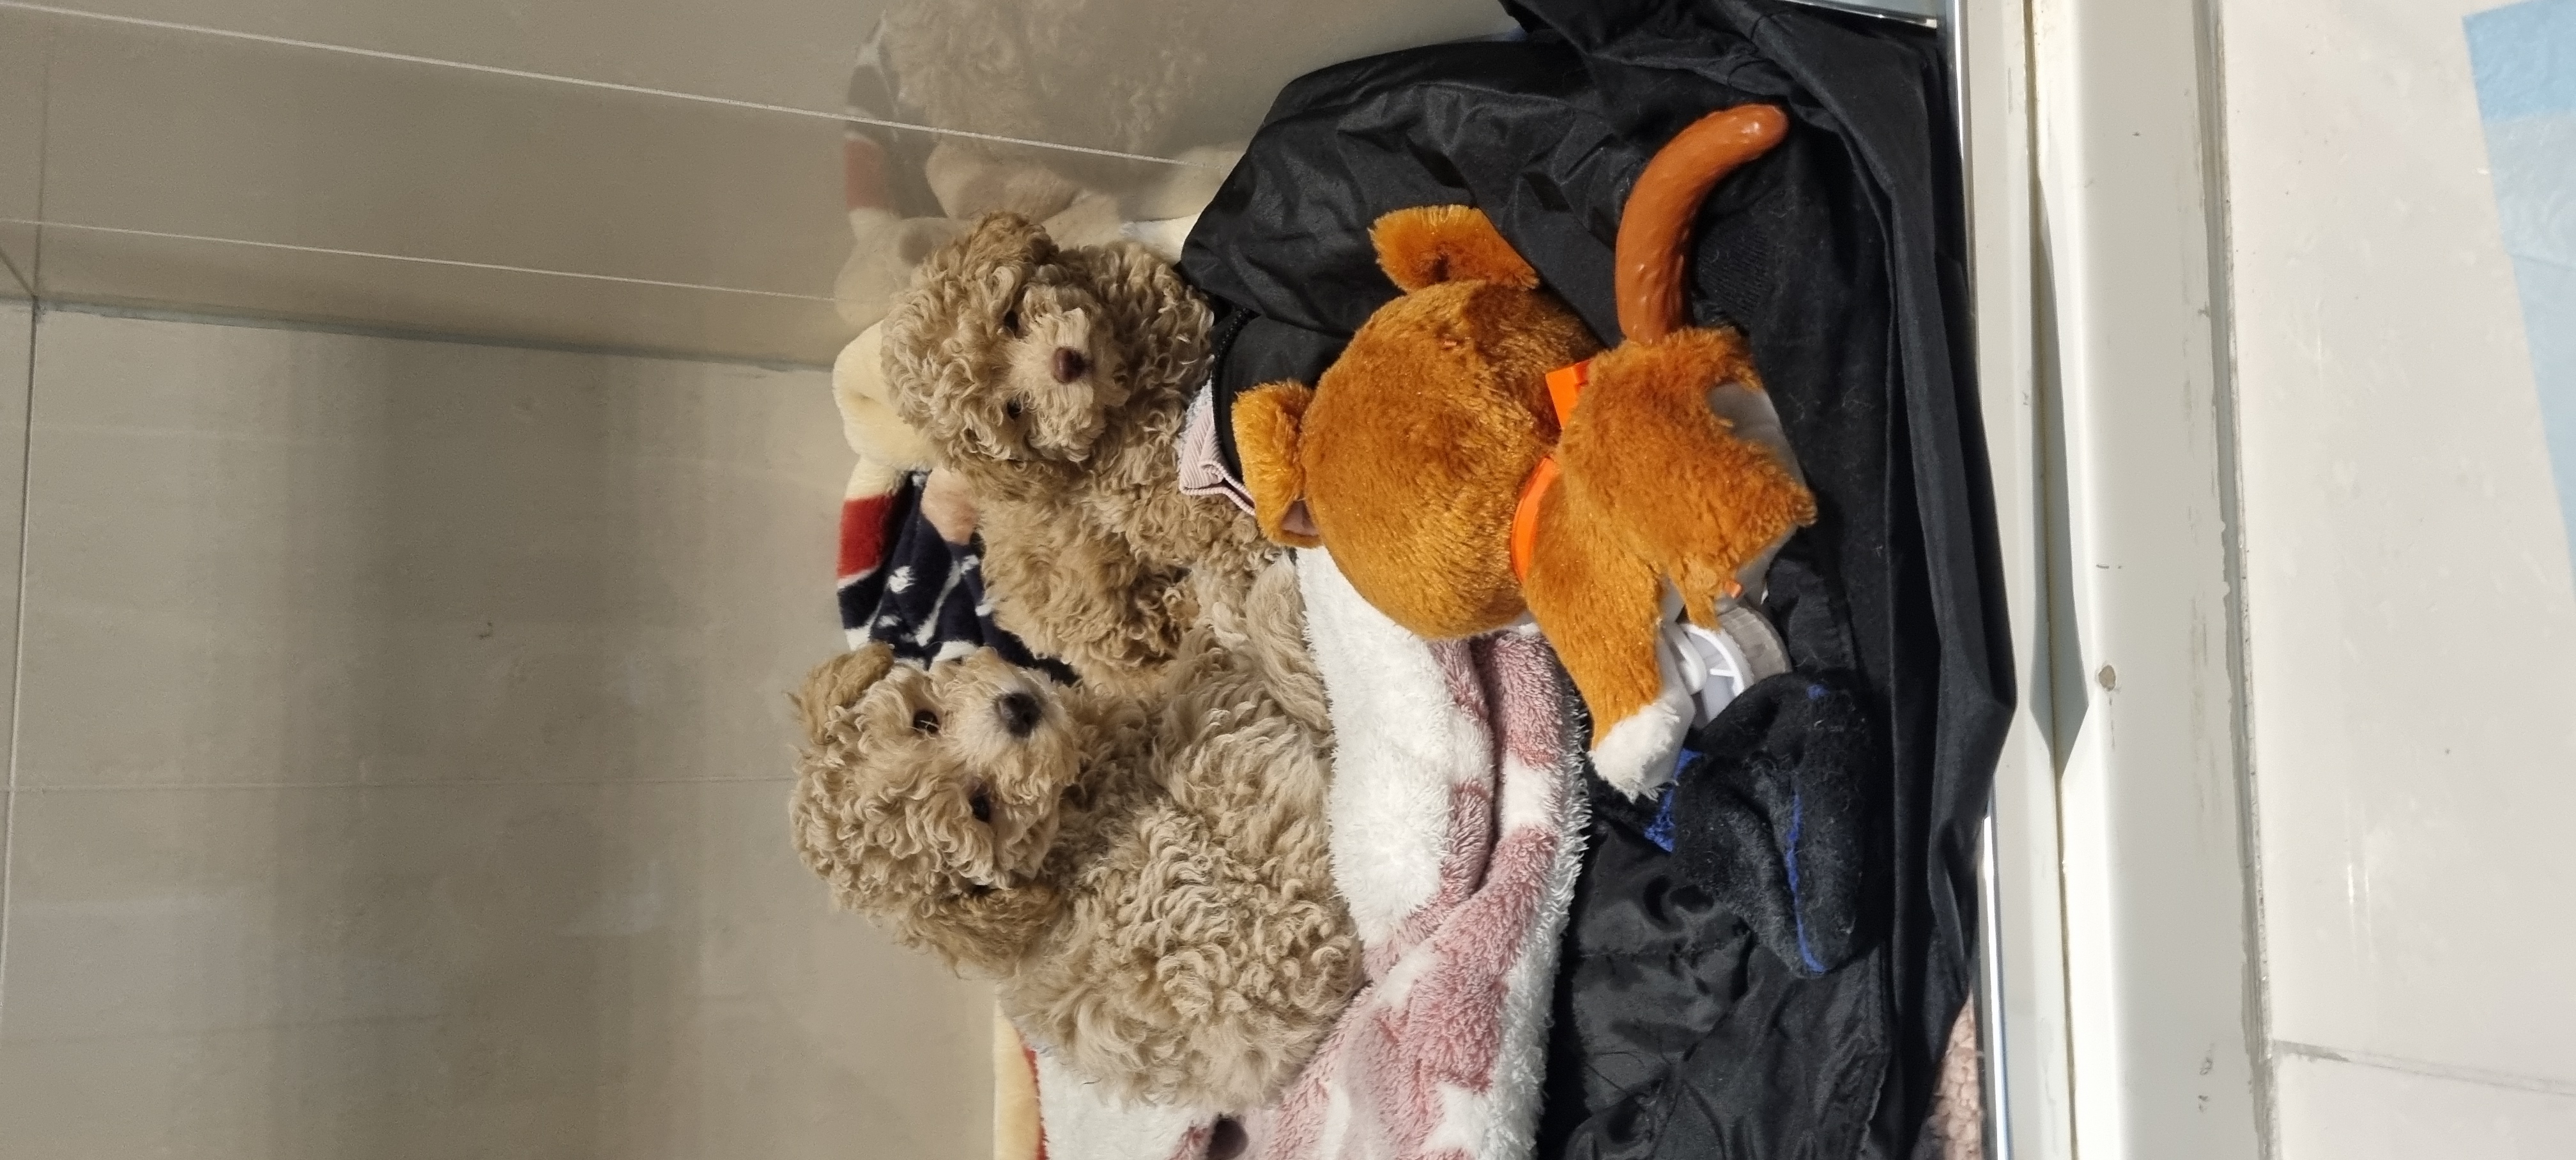 Toy Poodle – Taylors Hill